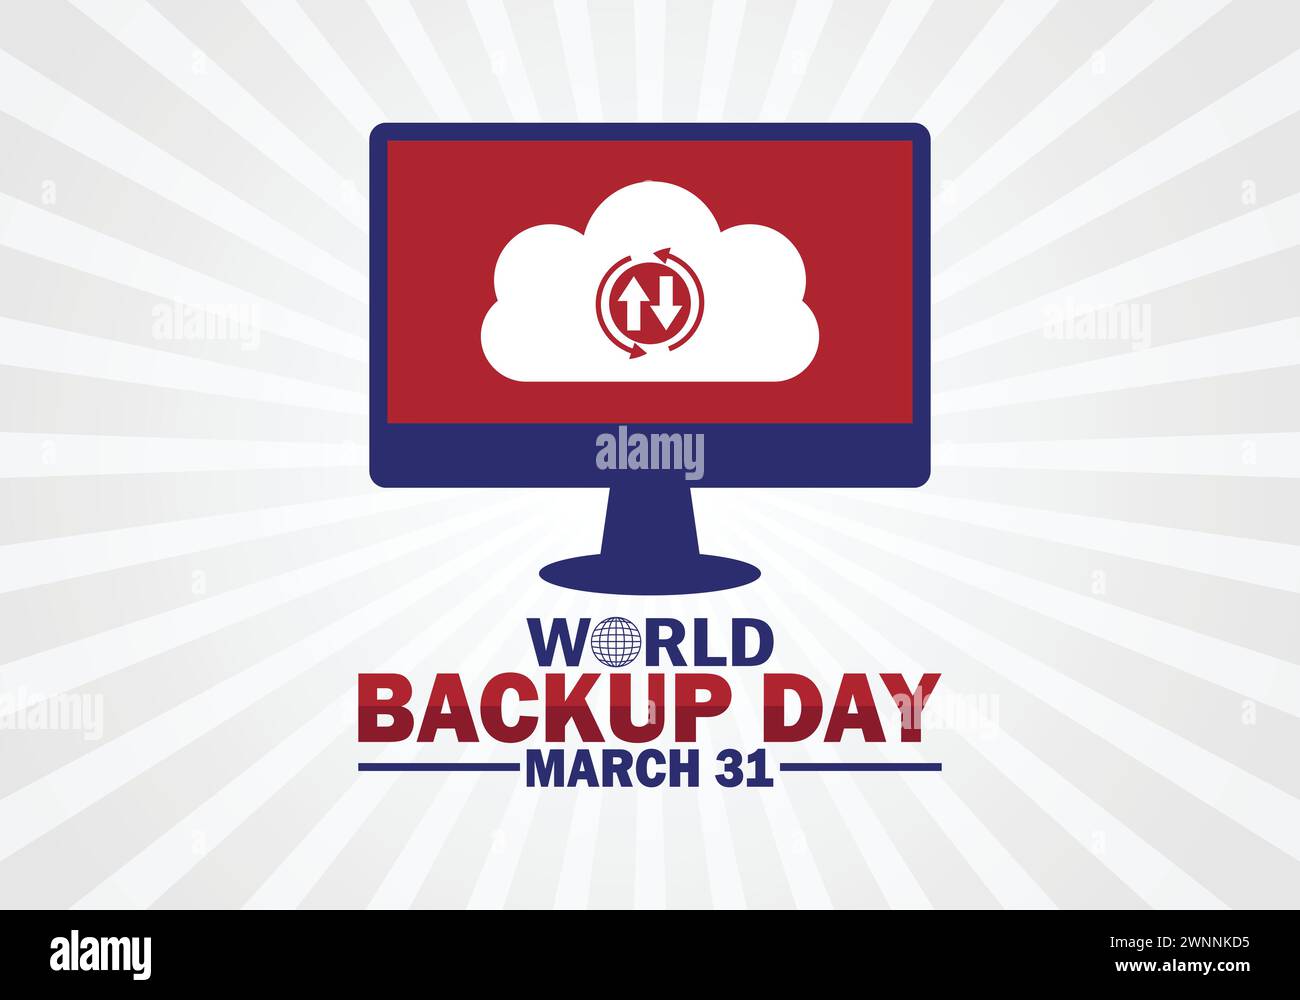 World Backup Day. Holiday concept. Template for background, banner, card, poster with text inscription Stock Vector